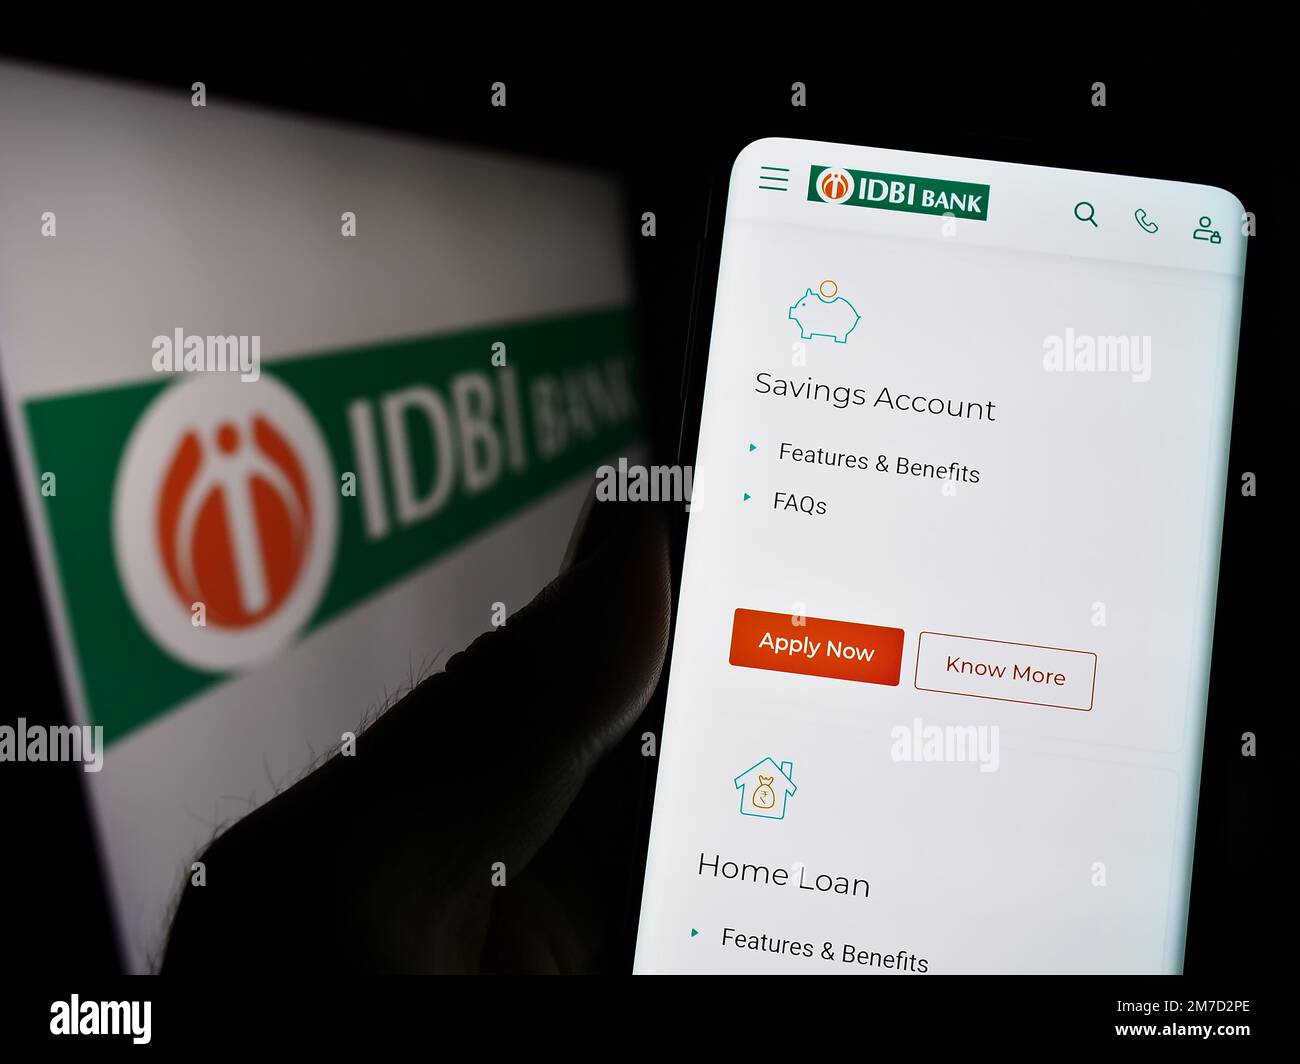 Person holding cellphone with webpage of Indian financial company IDBI Bank Limited on screen in front of logo. Focus on center of phone display. Stock Photo